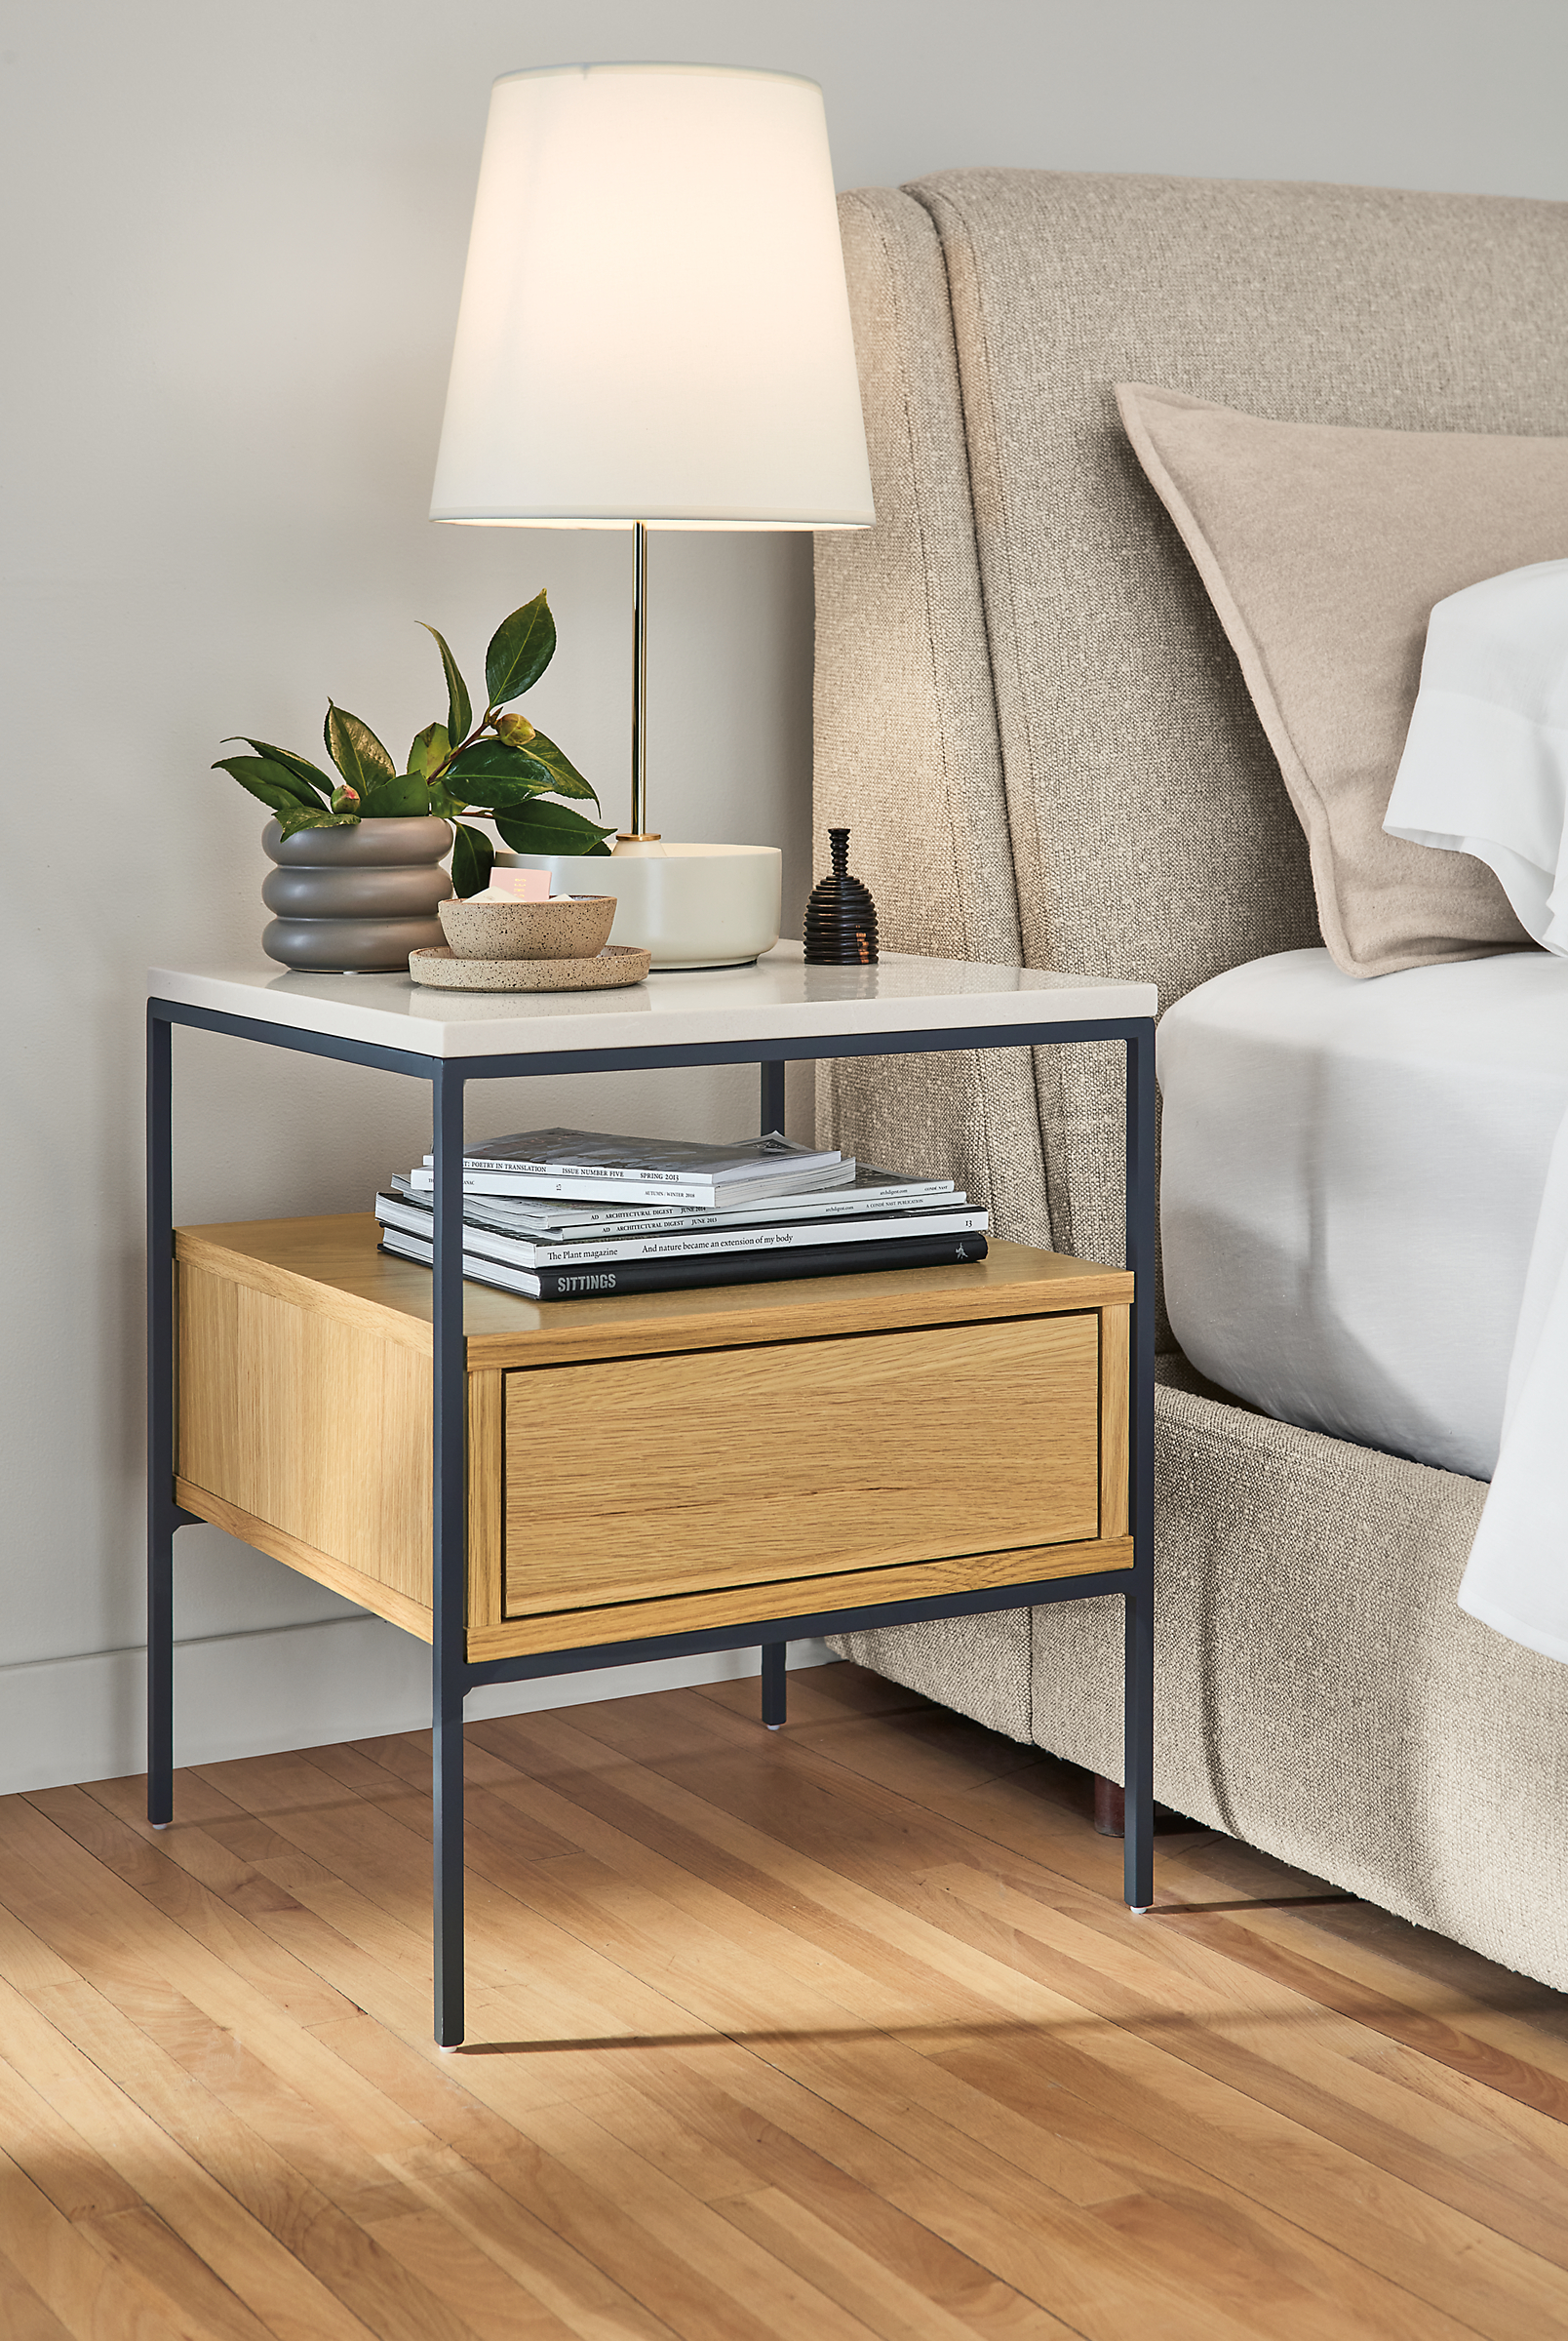 detail of williams end table with capstone table lamp beside nora bed.